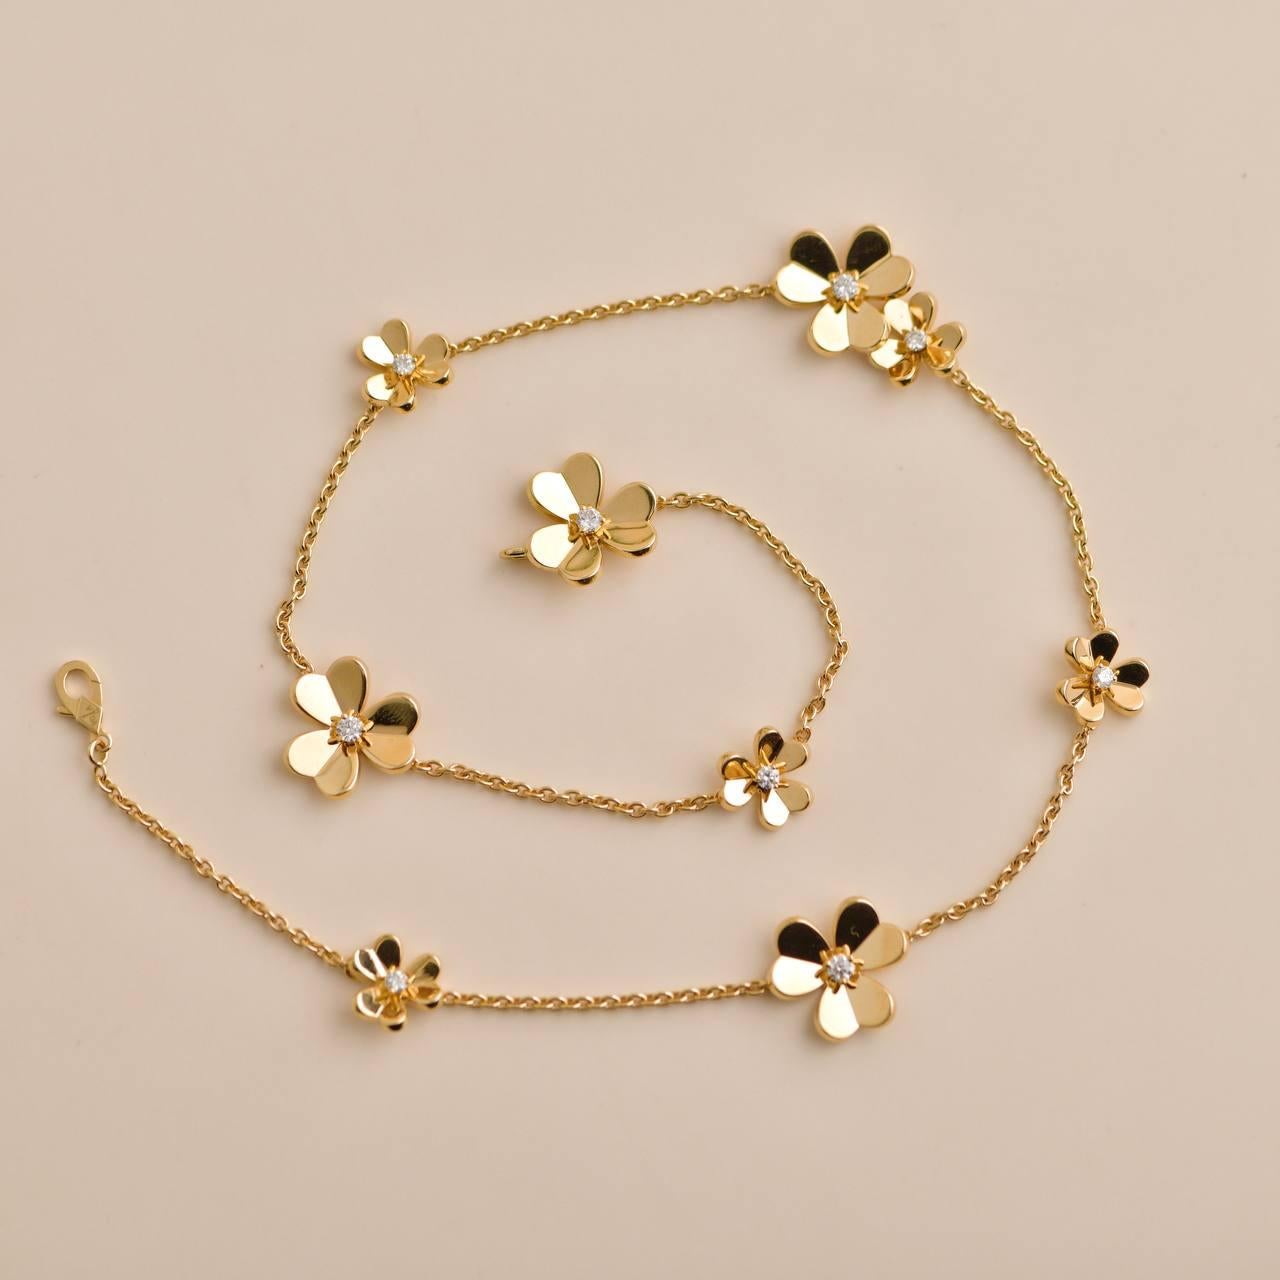 Check out this beautiful Van Cleef & Arpels necklace from the stylish Frivole collection. It has 9 flowers made of 18k yellow gold, each adorned with 9 round brilliant-cut D-E-F color IF-VVS clarity diamonds, totaling about 0.61 carats. Crafted in